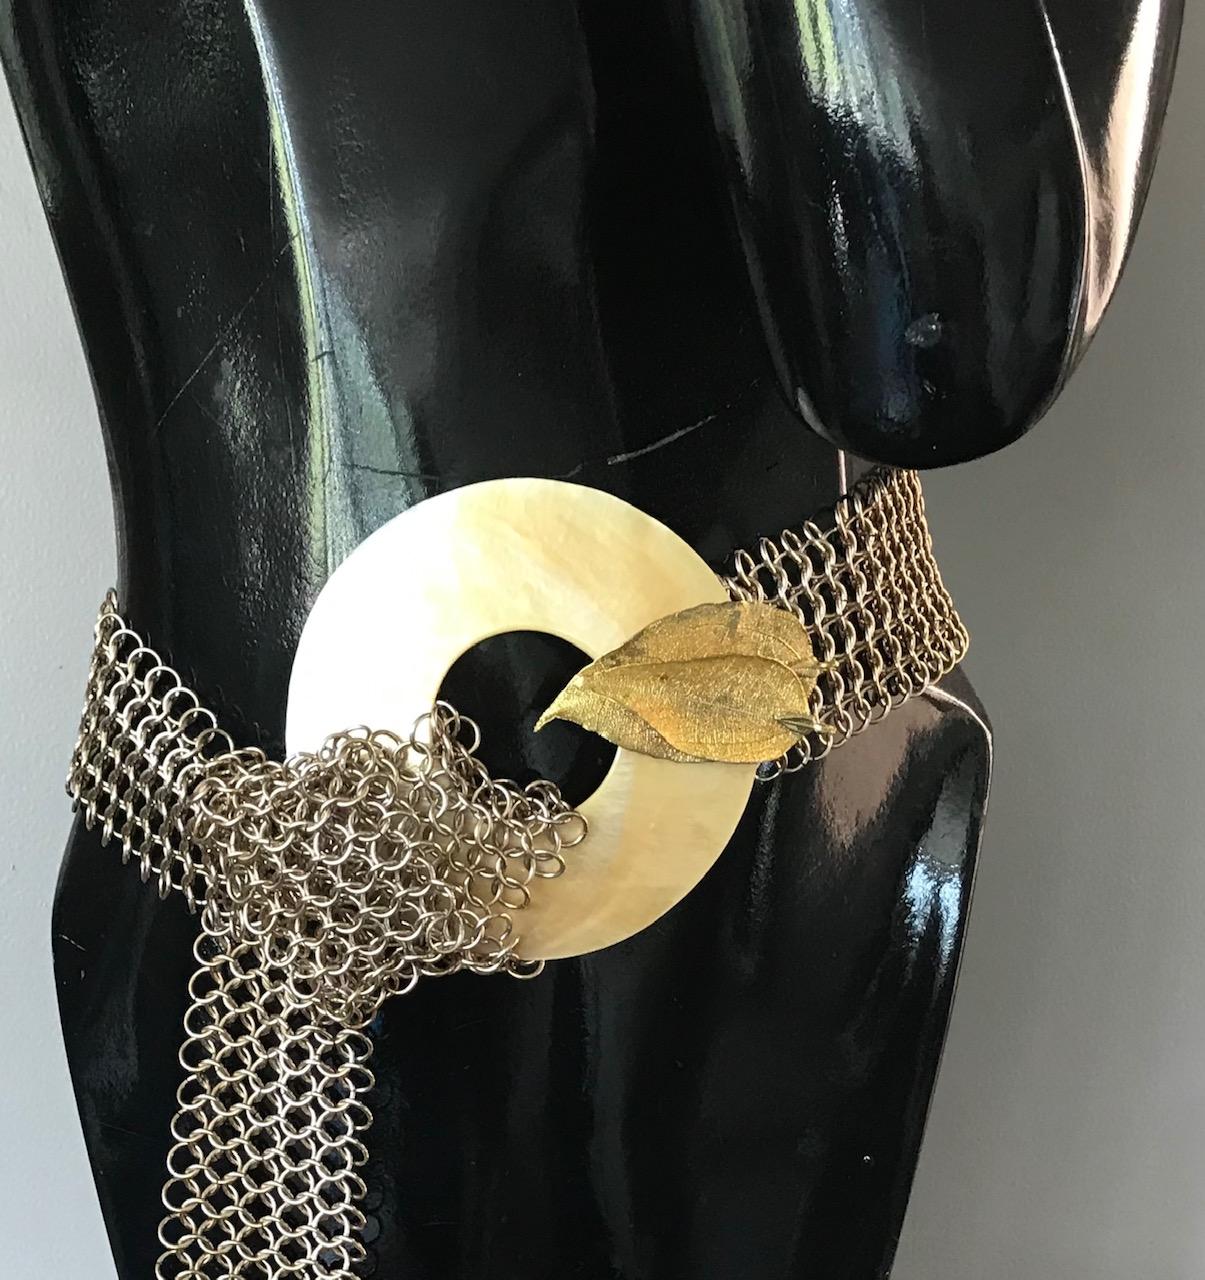 This necklace /belt is eco-luxe and sustainable. The materials used are gold iridescent mother of pearl/nacre and Vermeil  chainlink mesh. Two vermeil leaves are attached as enhancements on the mother of pearl. This piece can be worn as a belt or as